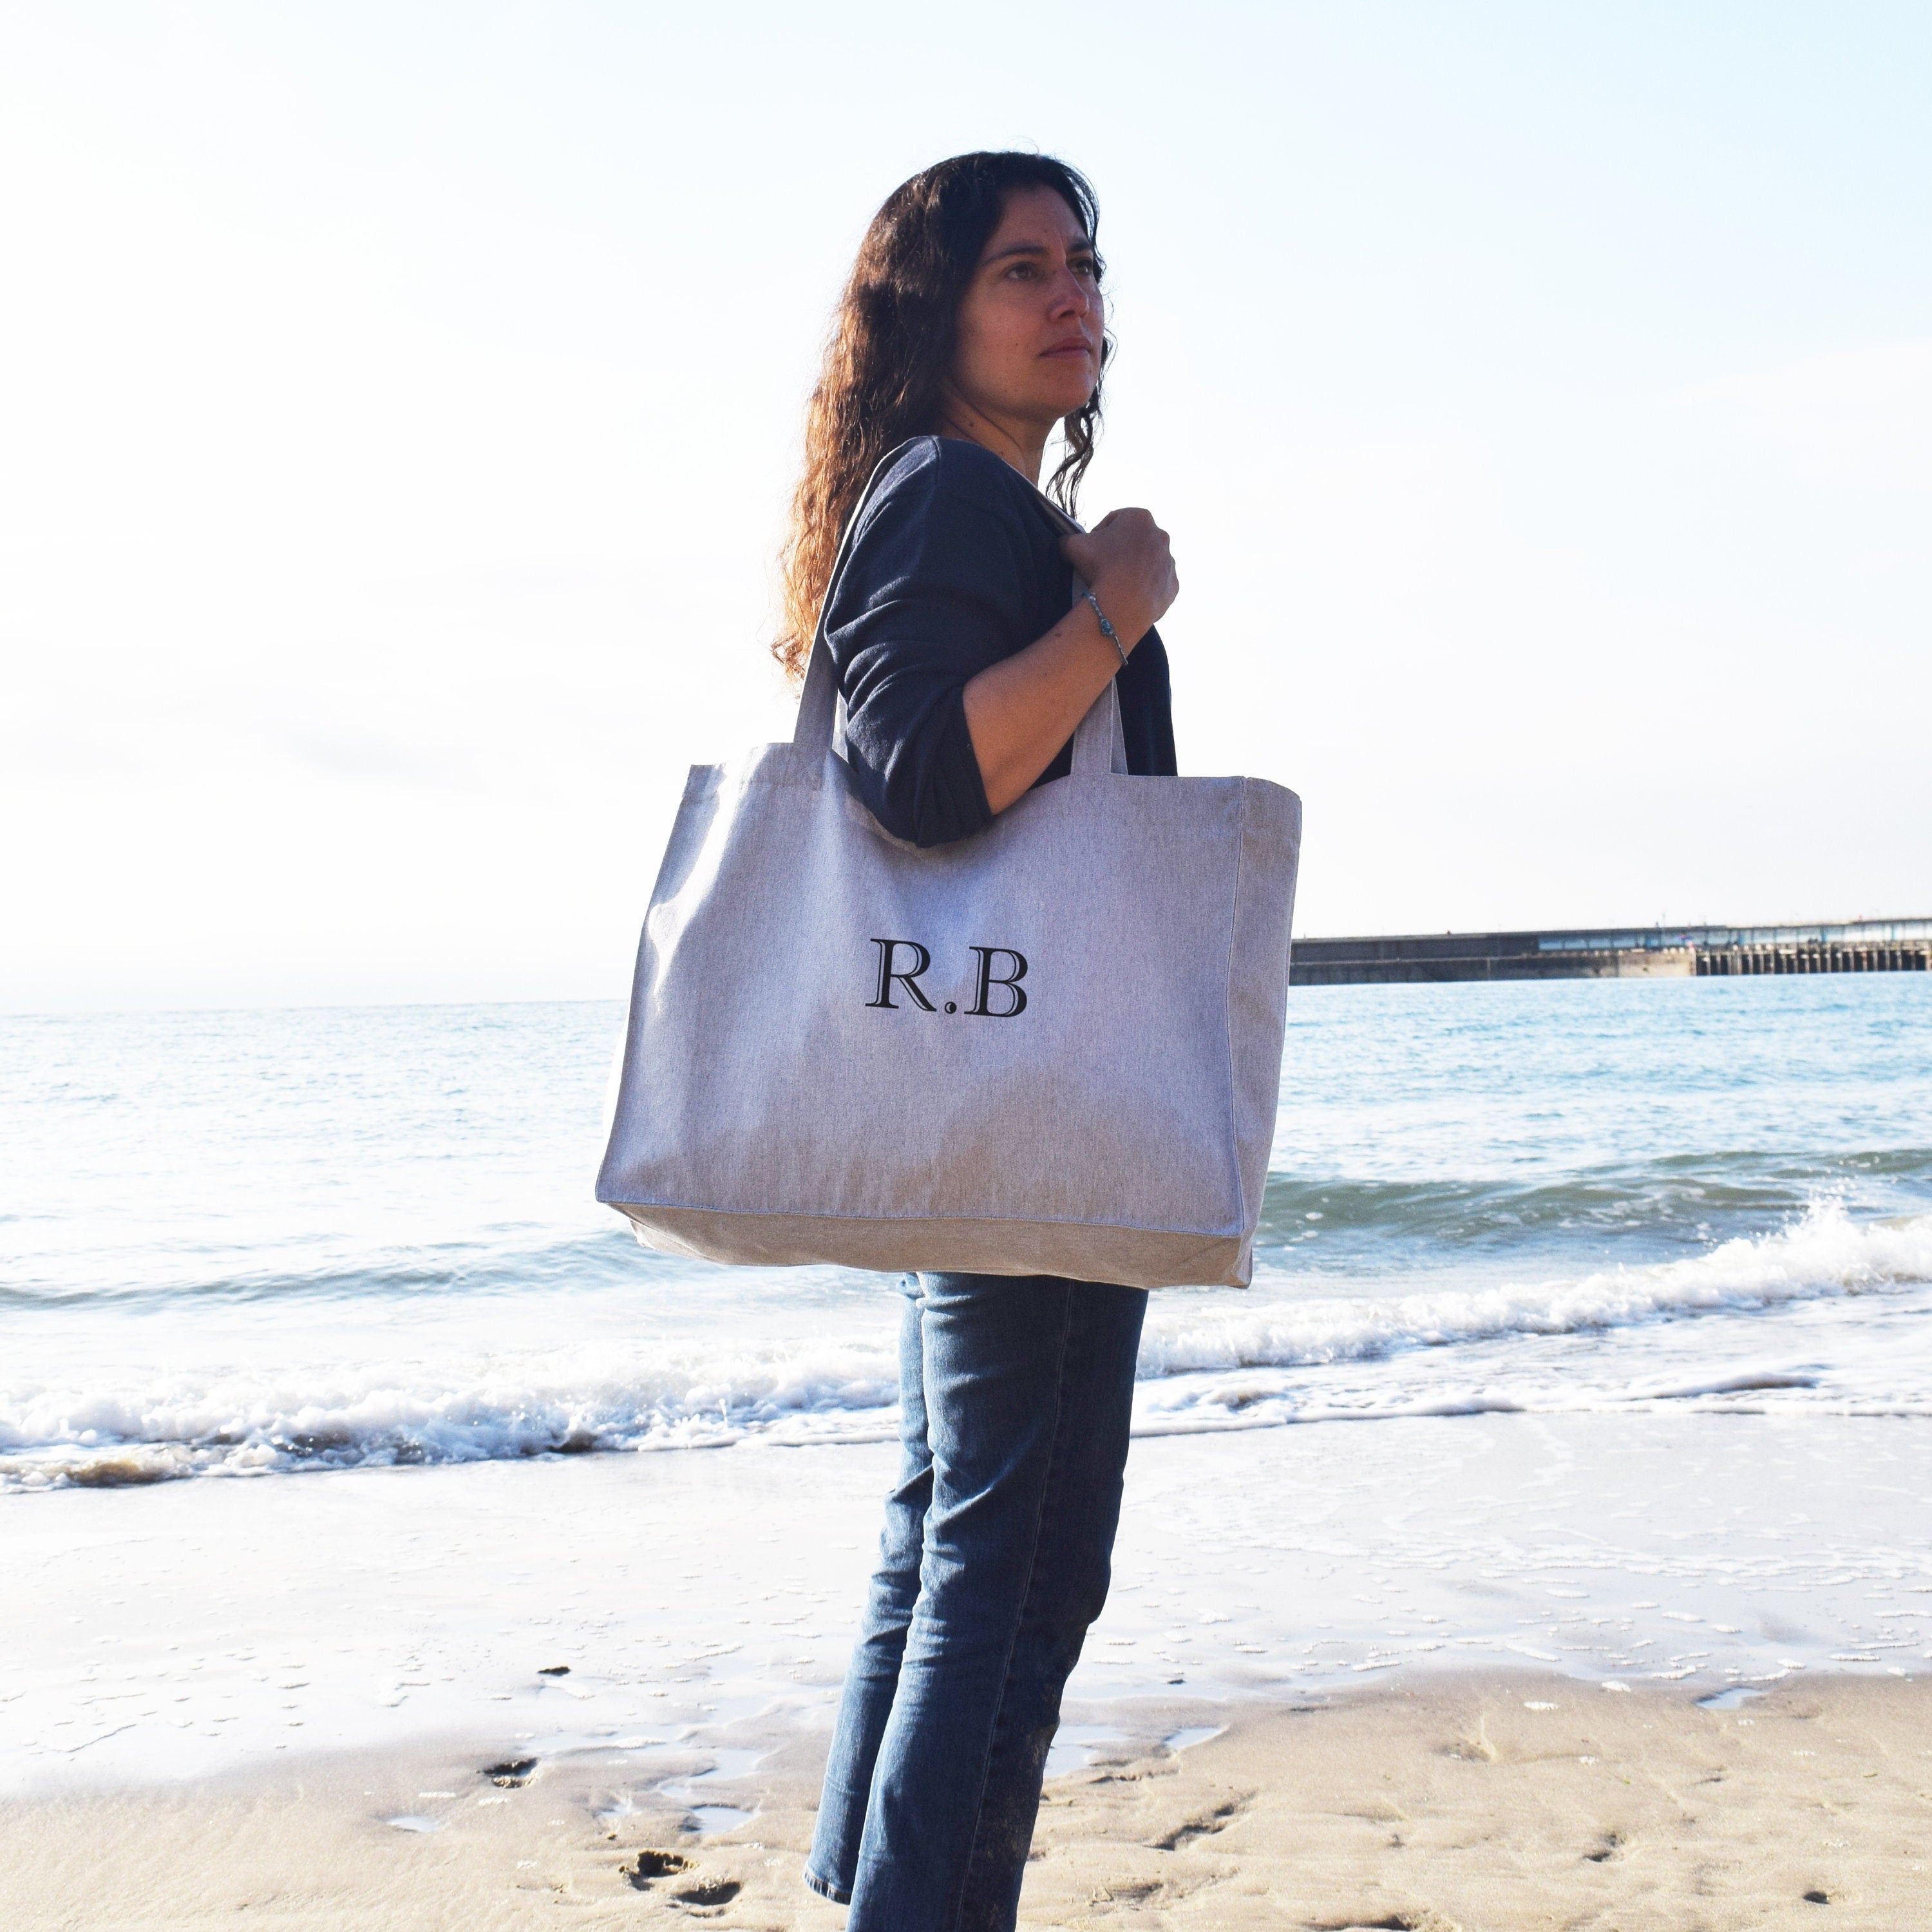 Personalised Initials Oversized Beach and Shopping Bag, Holiday & Travel bag, recycled Cotton, birthday gift, Monogram